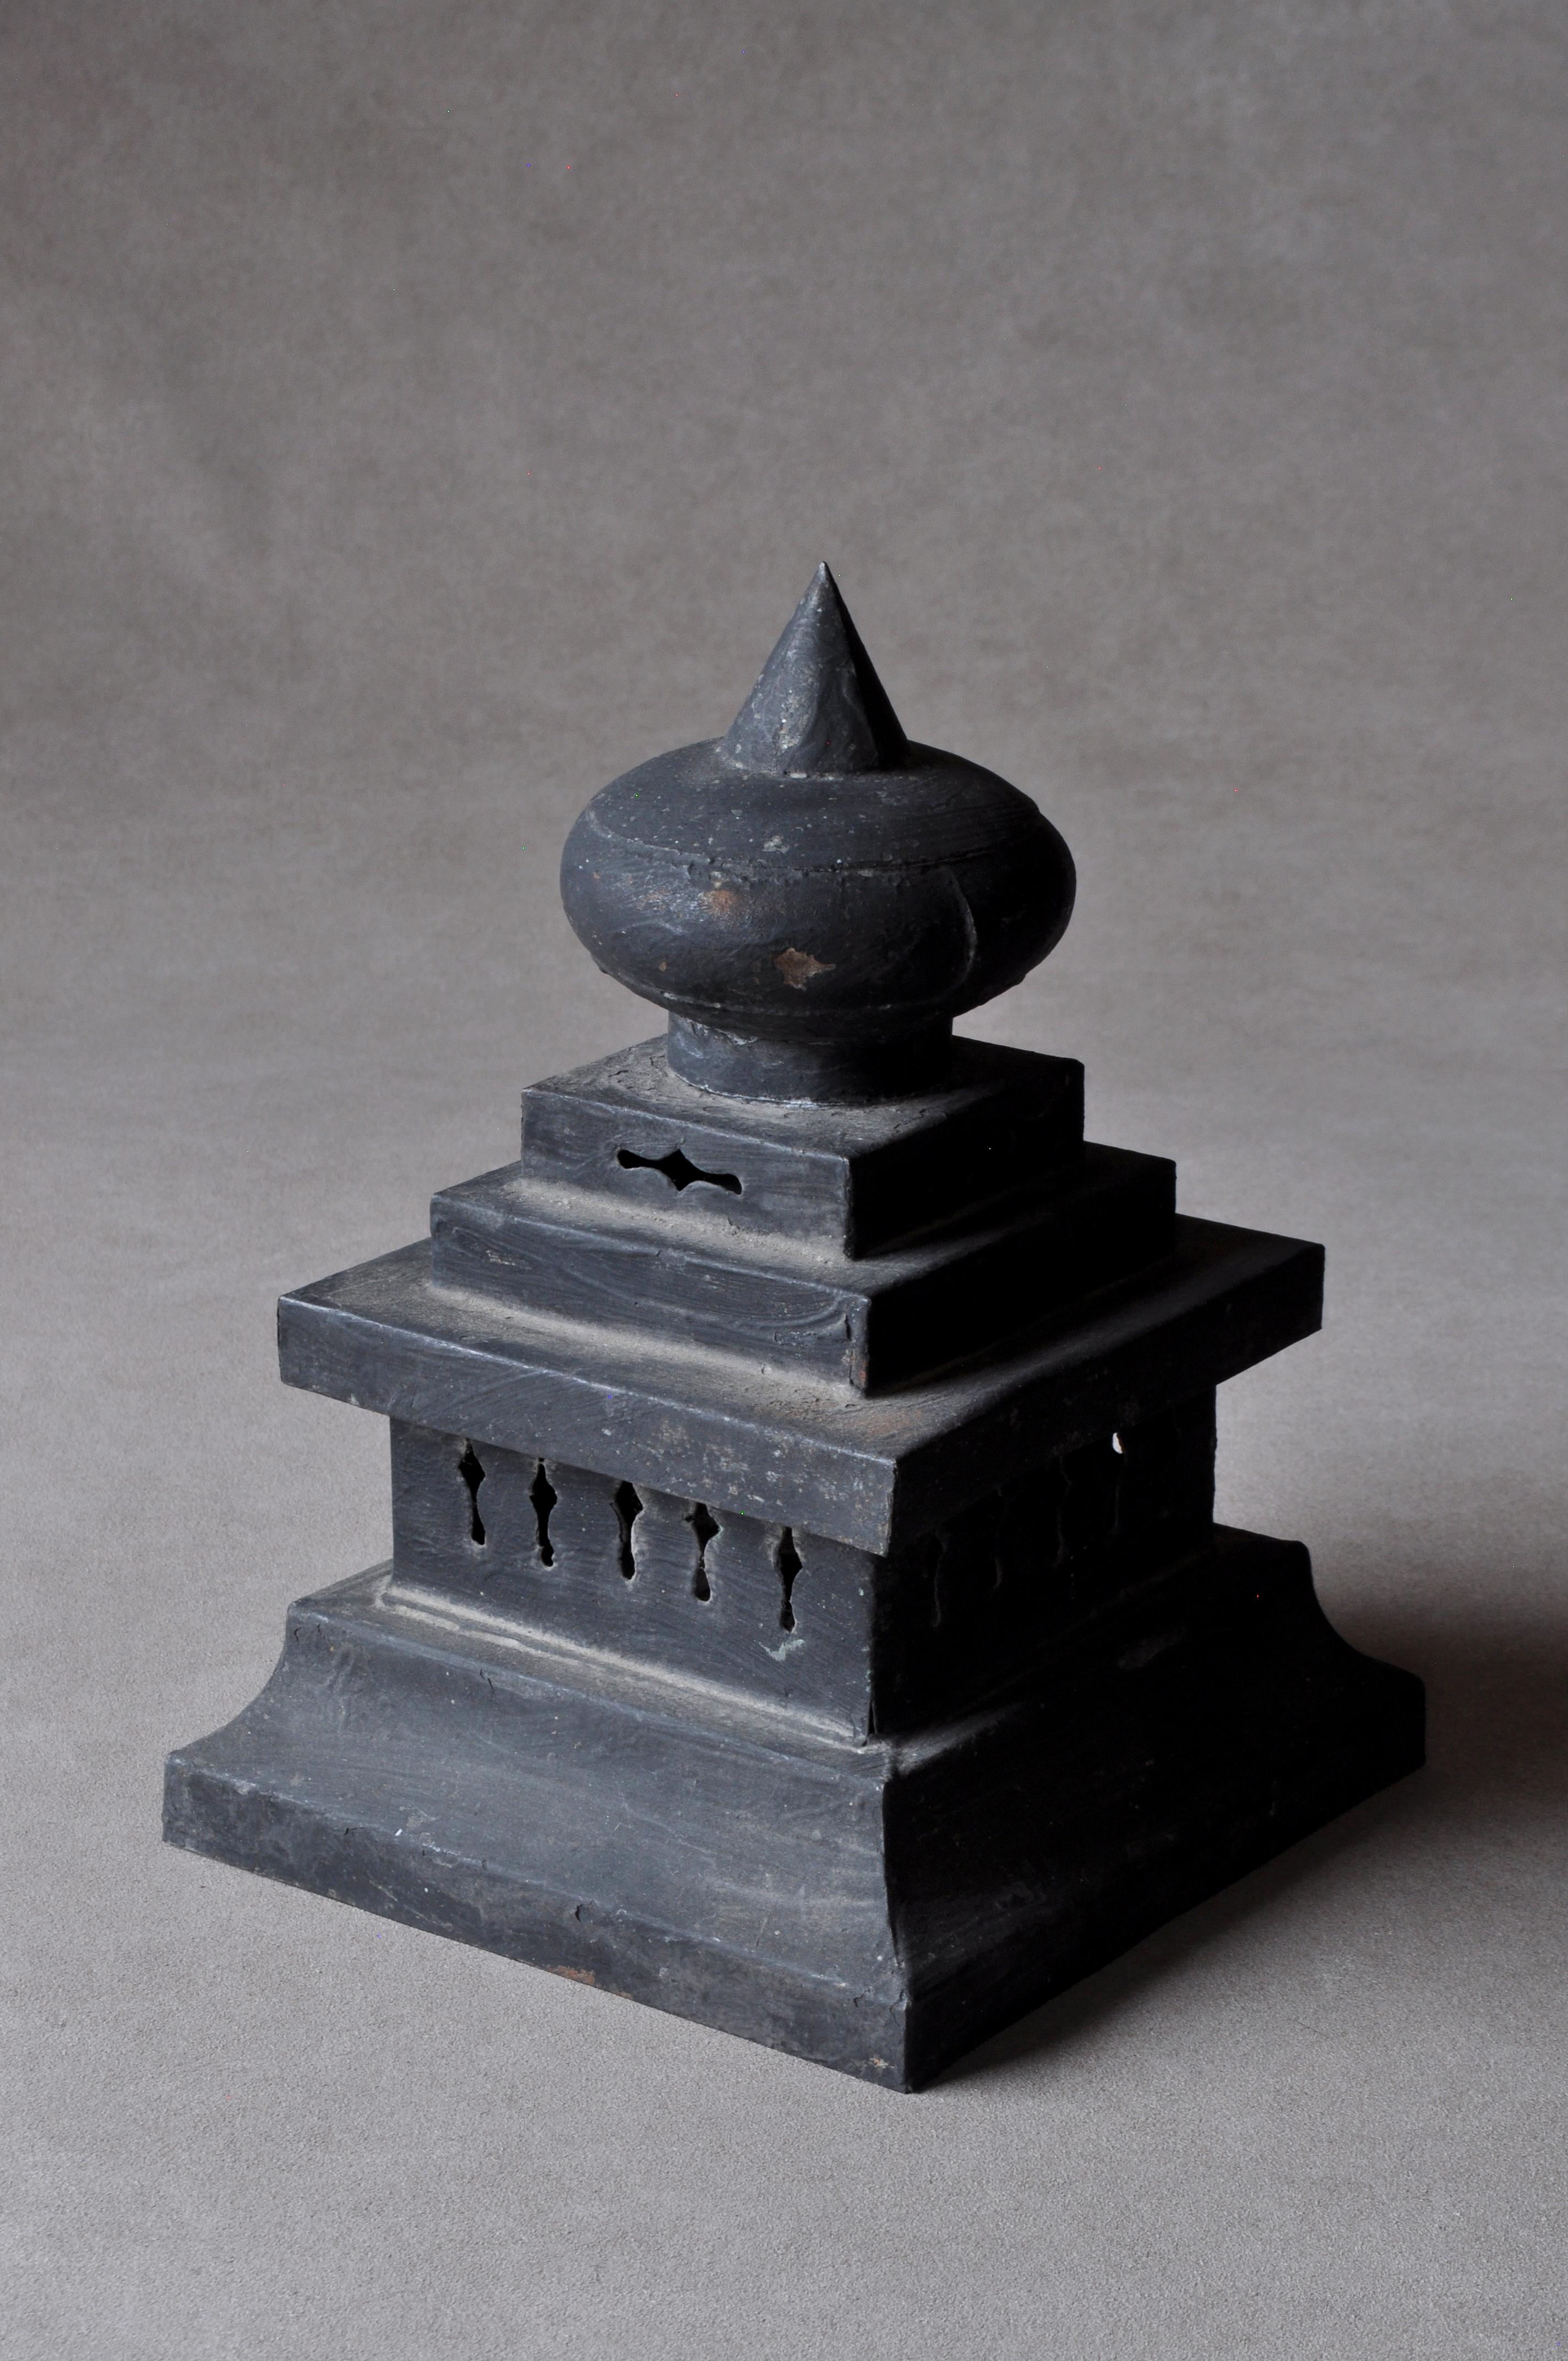 Japanese tin-made Buddhist pagoda with hoju (precious orb) standing for the universe (everything). Early 20th century. approx. H 21.5 x 15 x 15cm (8.46 x 5.90 x 5.90in). Some expected stains and damage due to aging as is as seen.